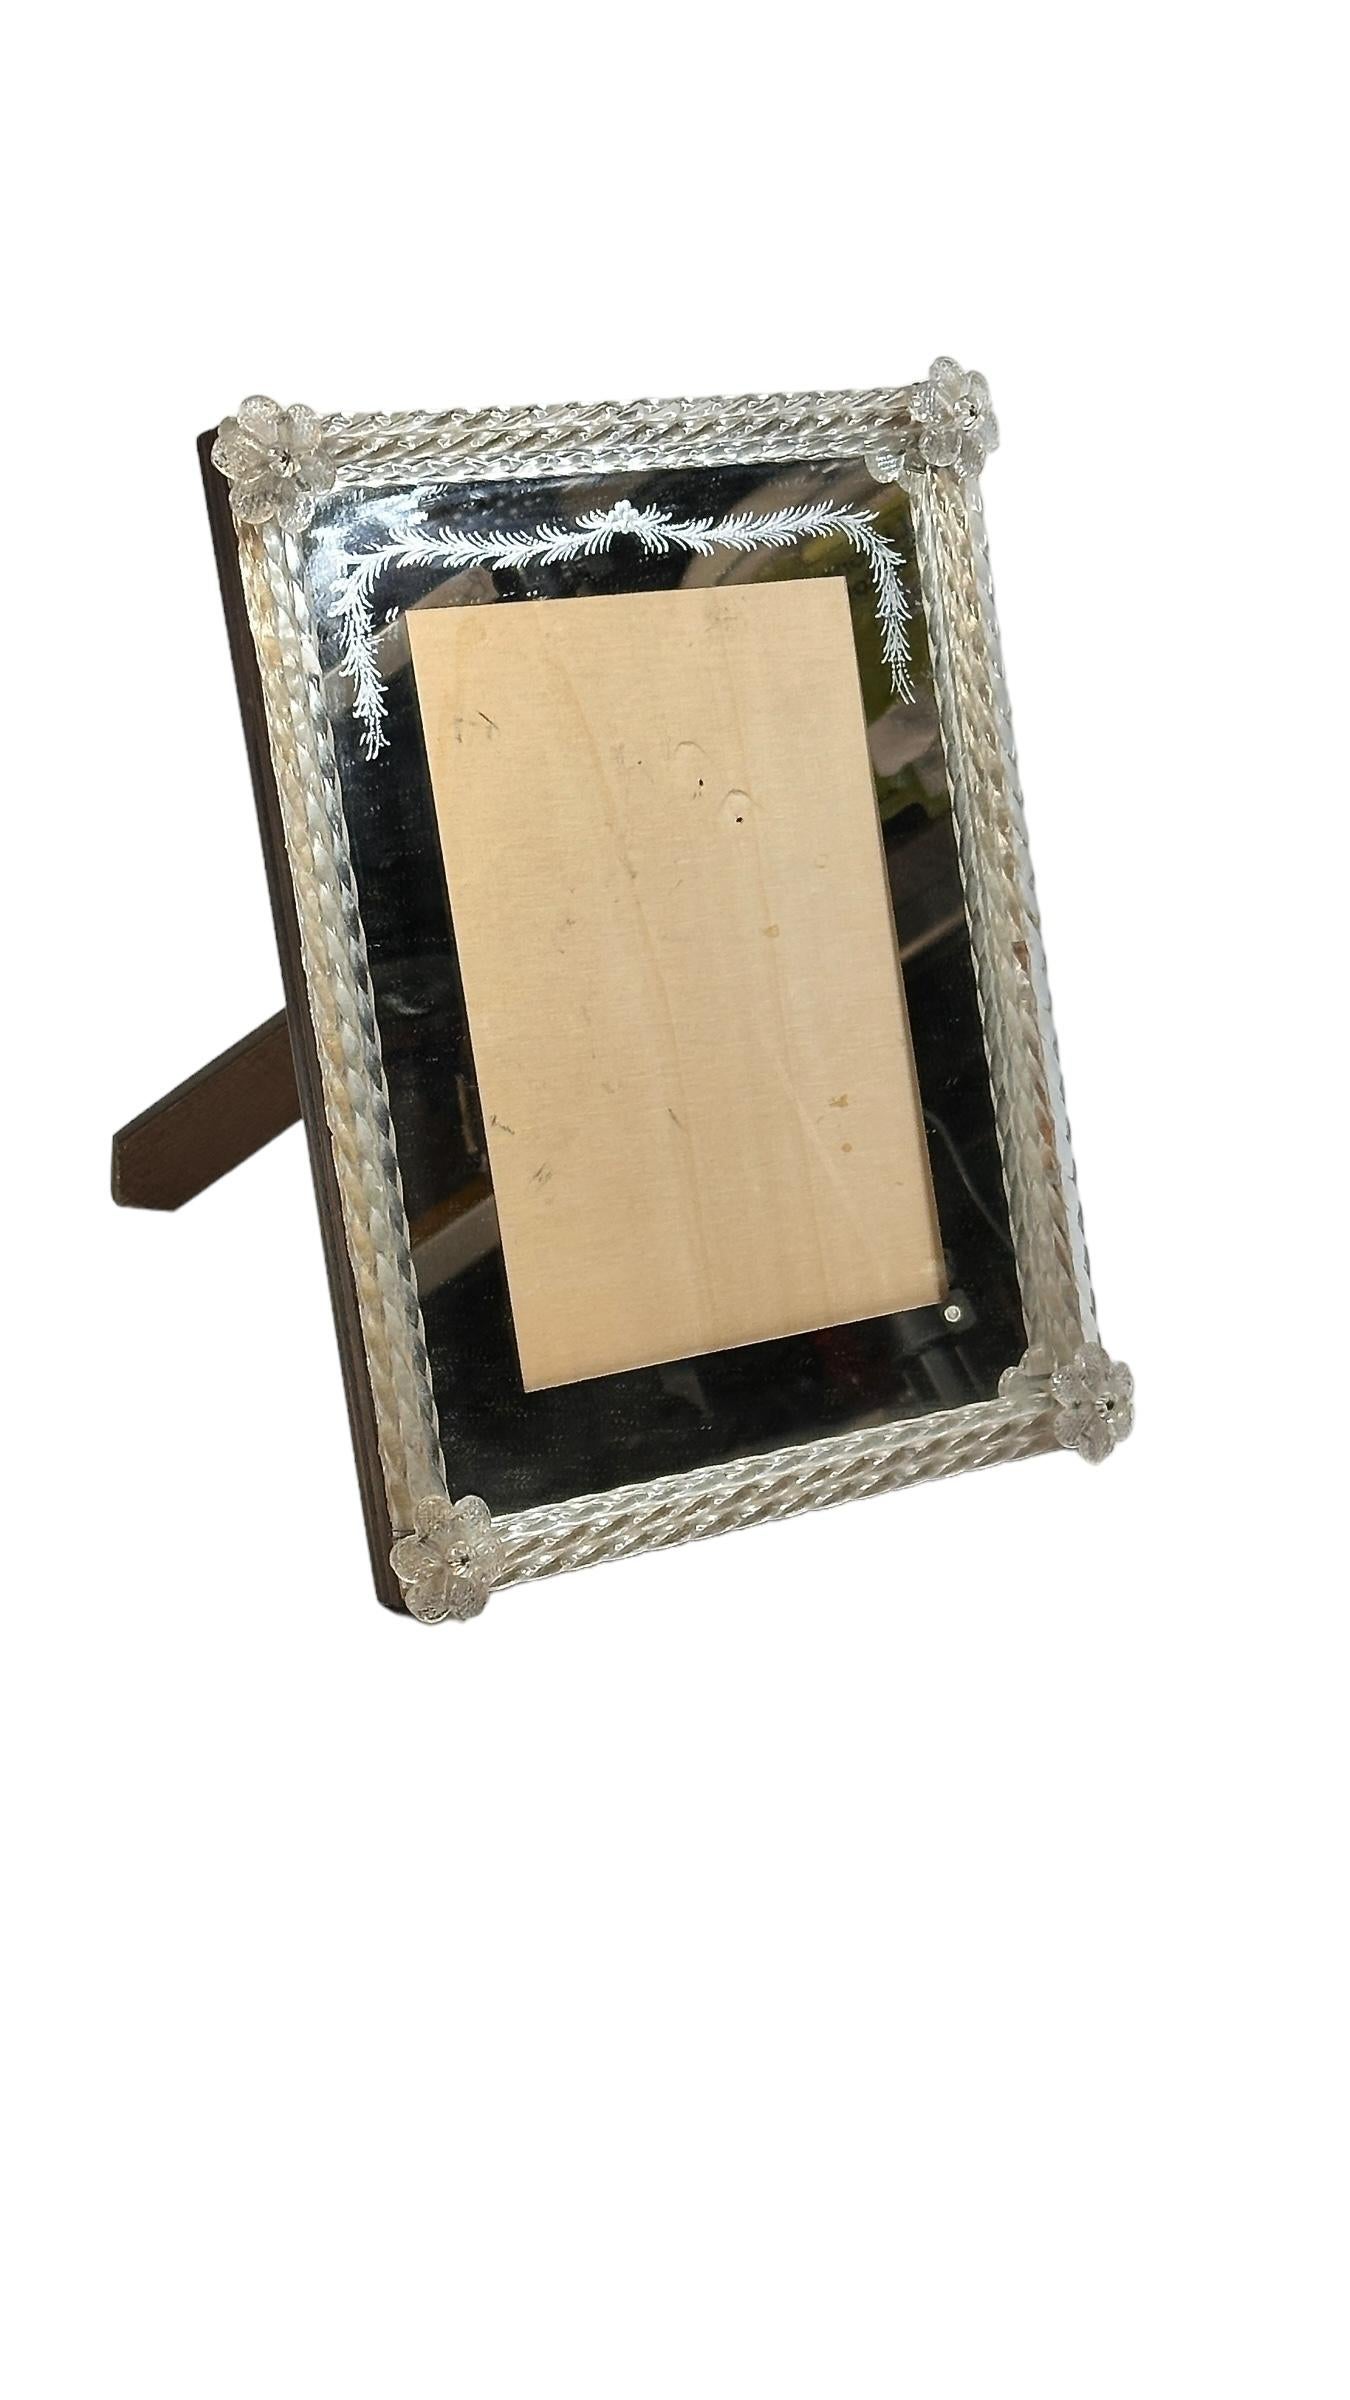 A gorgeous Murano glass picture frame surrounded with handmade gold flake clear glass flowers. With minor signs of wear as expected with age and use. It measures approximate 10.25